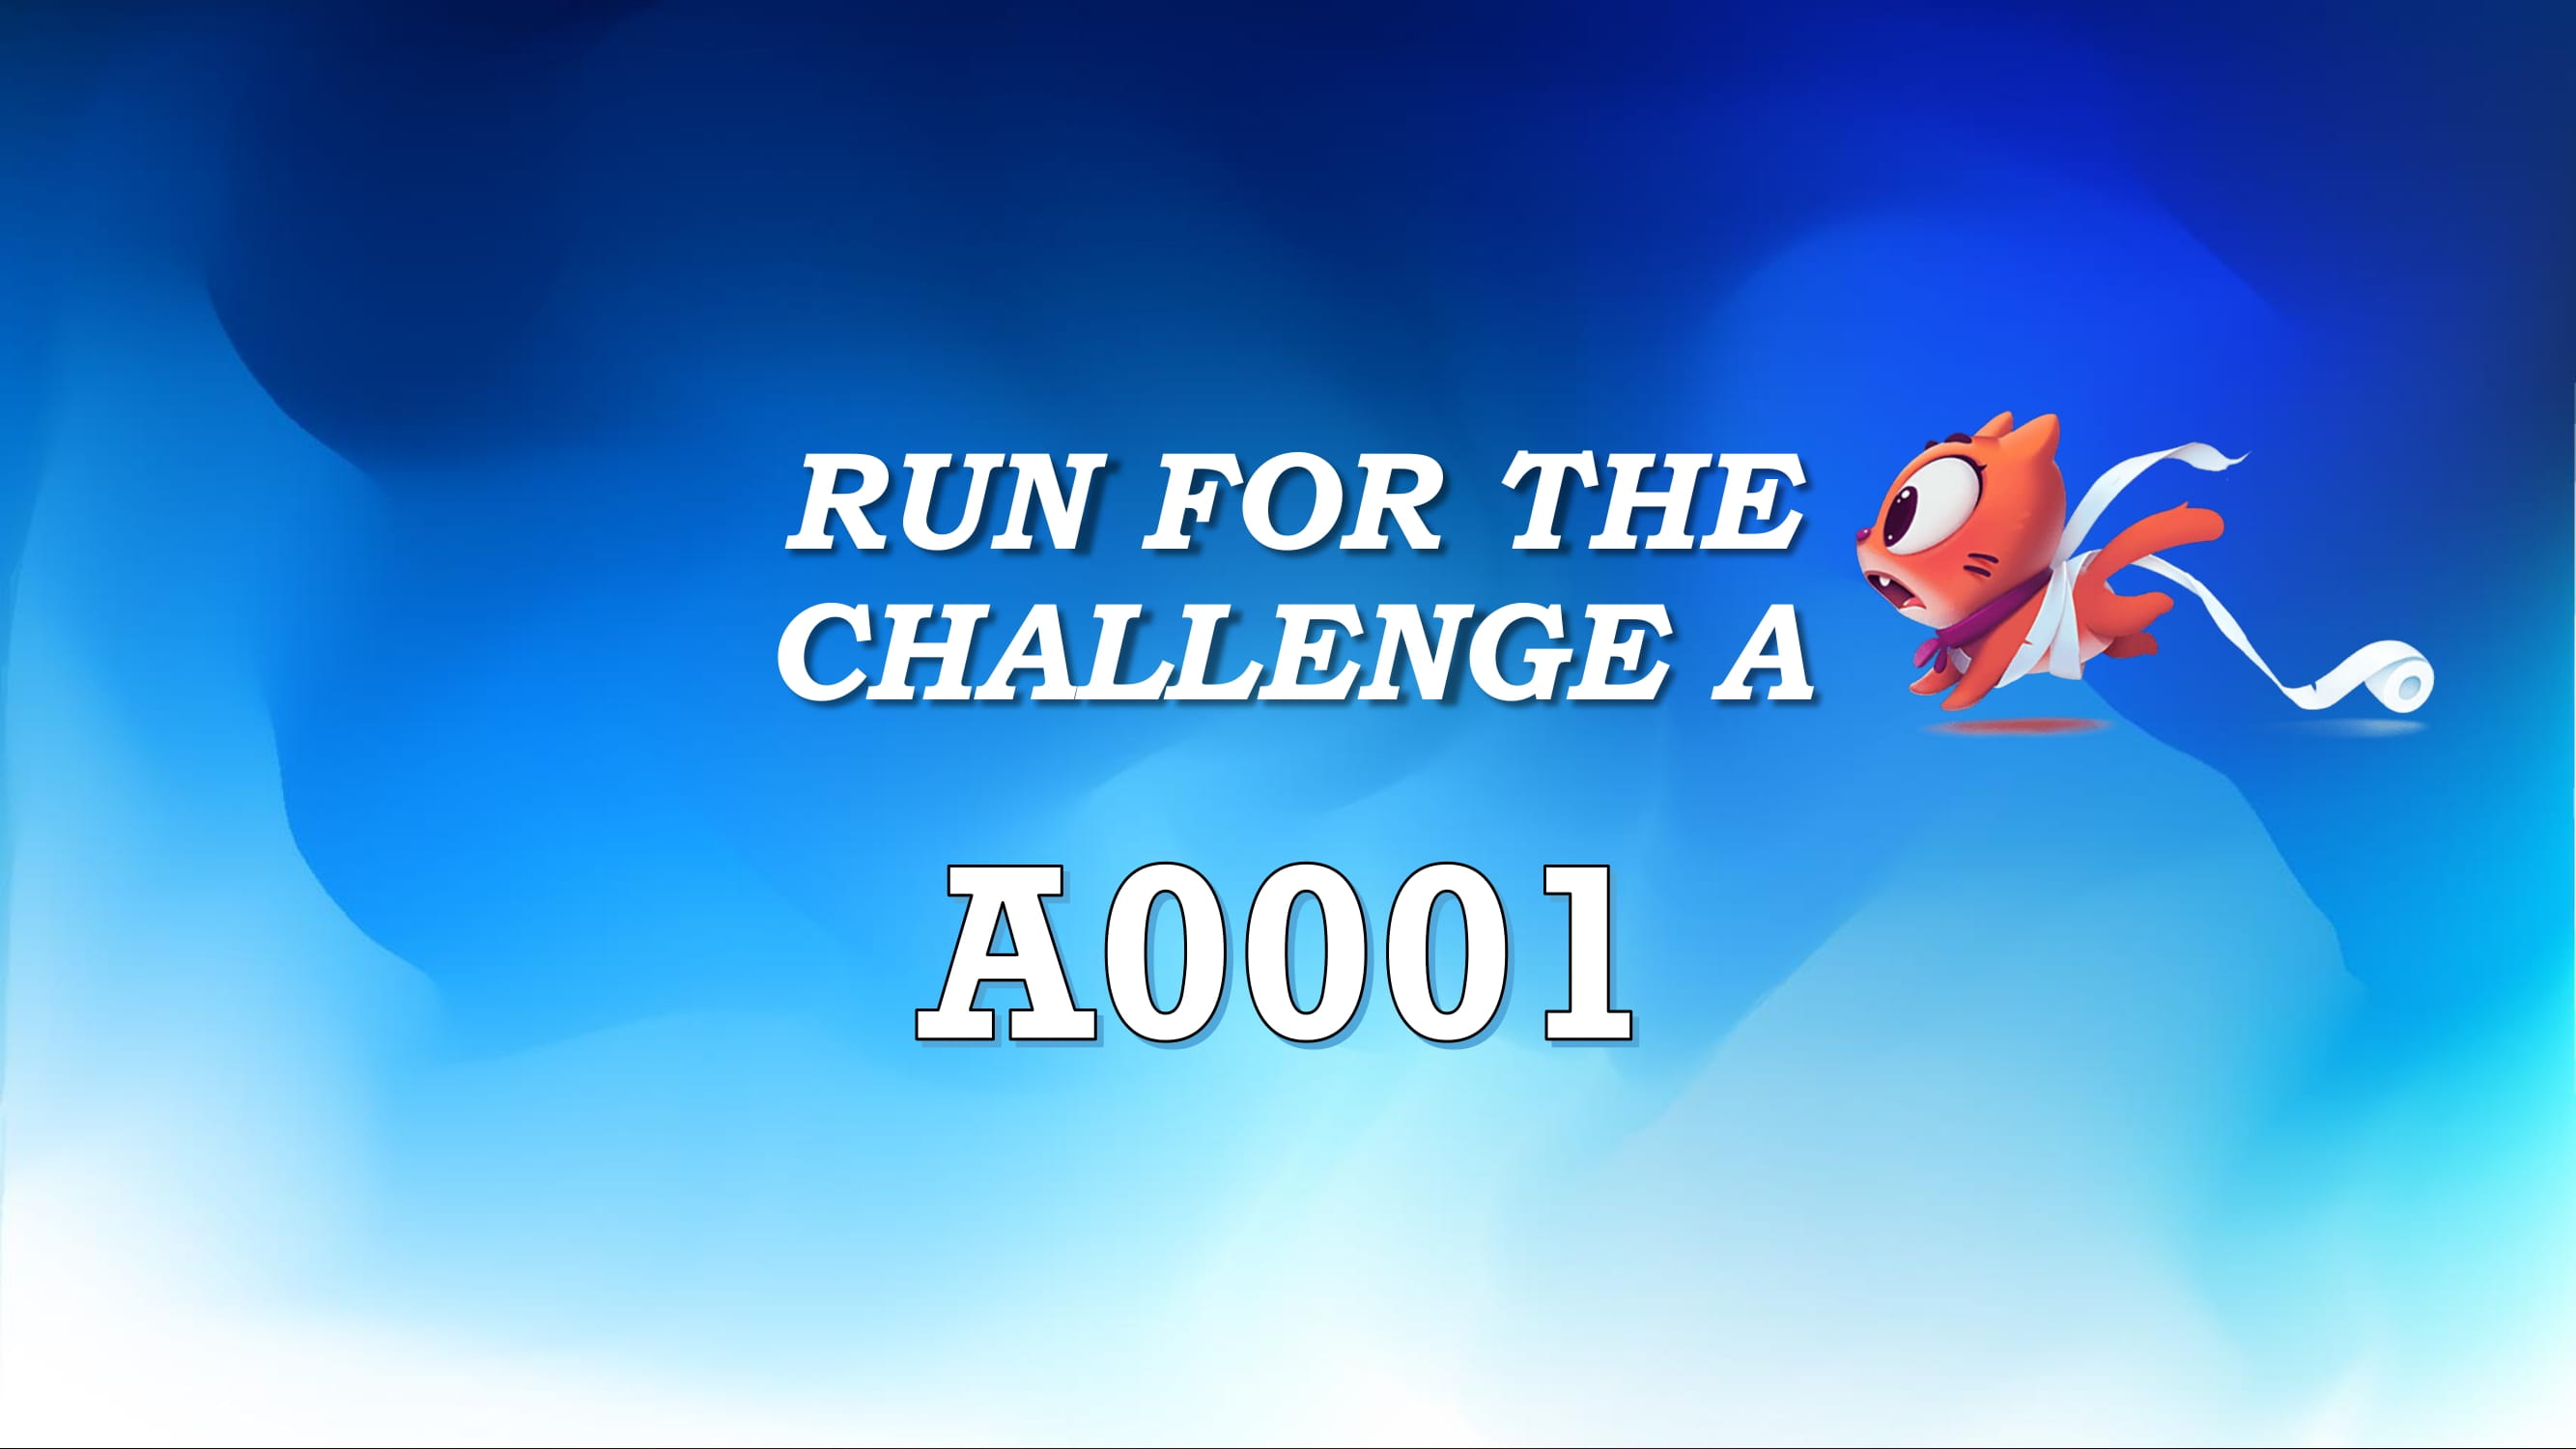 Run For The Challenge A 2021